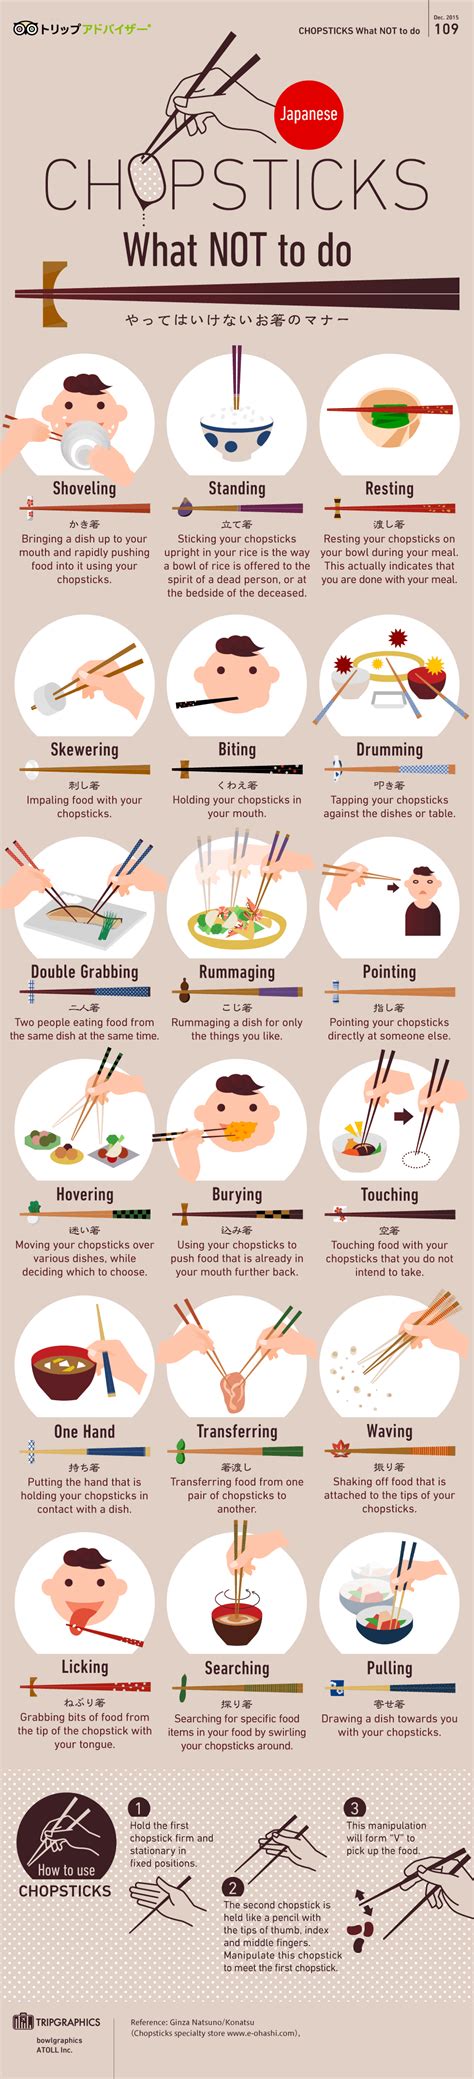 Later, chopsticks expanded further to places like vietnam, thailand, malaysia, indonesia. How To Use Chopsticks Without Embarrassing Yourself | Daily Infographic